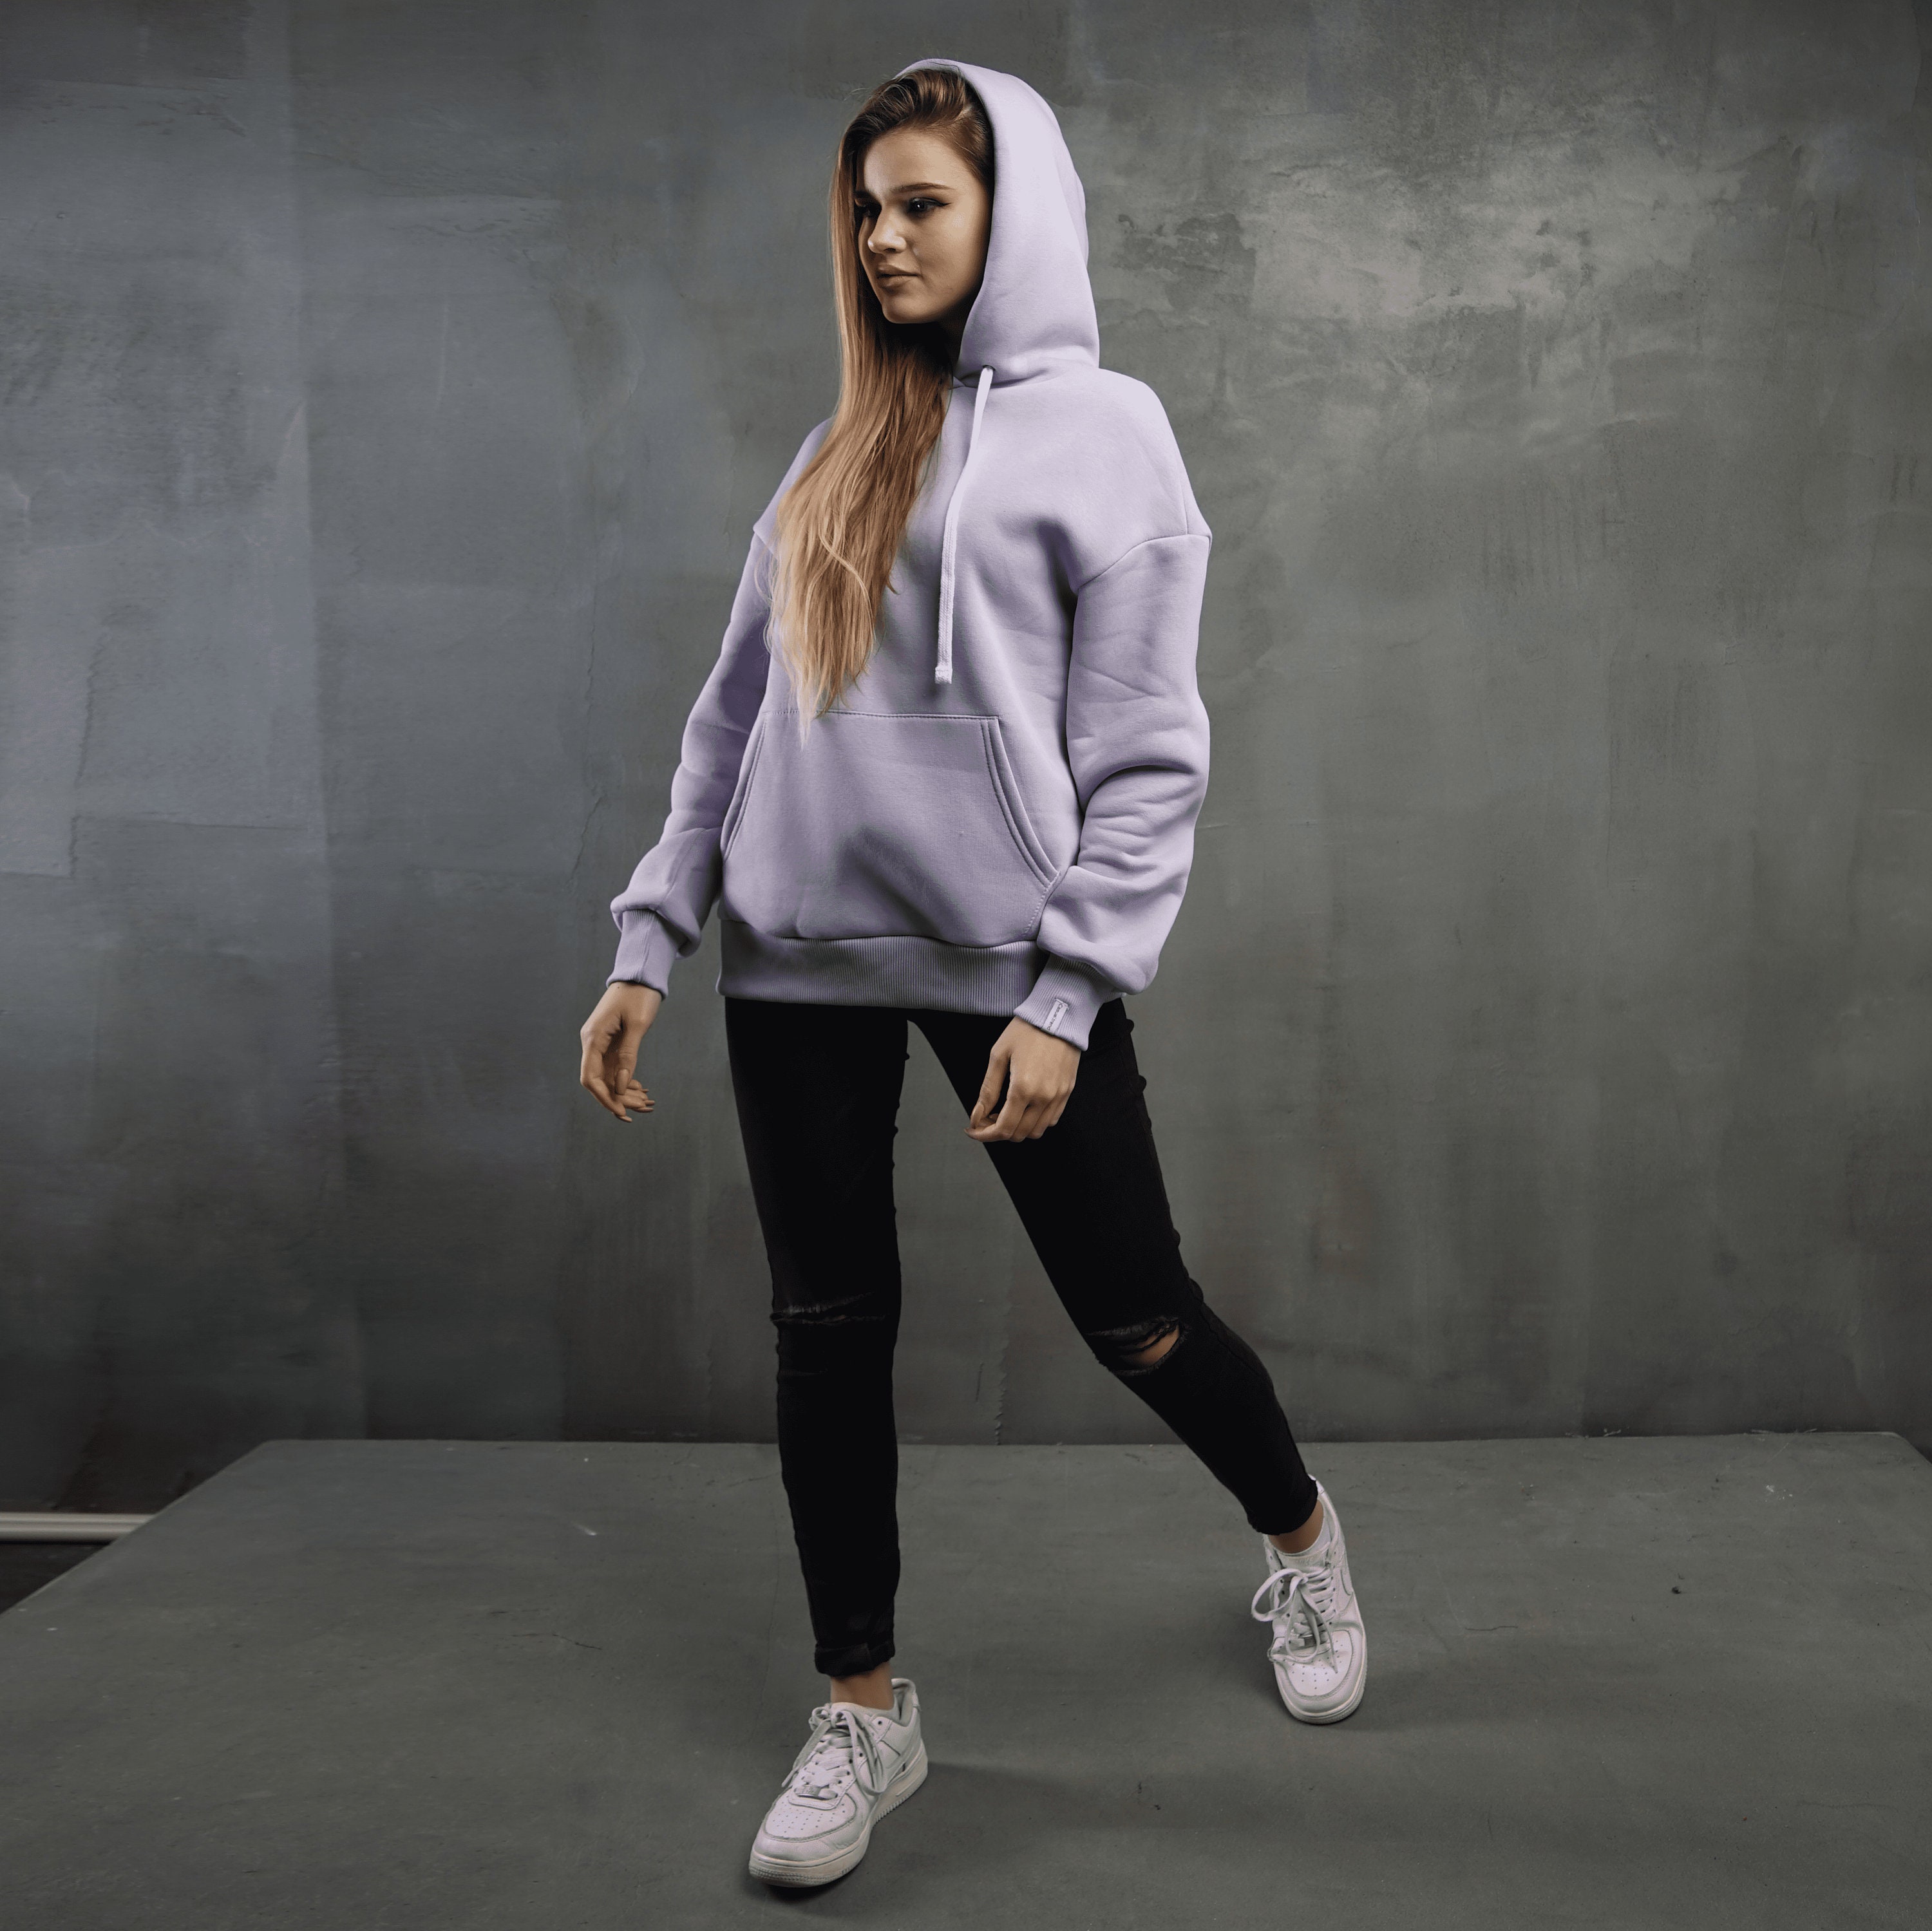 Stylish beautiful plump girl in fashionable sportswear with a purple oversized  sweatshirt and black leggings with trendy sneakers fix her hair near a gray  concrete wall in the city Stock Photo